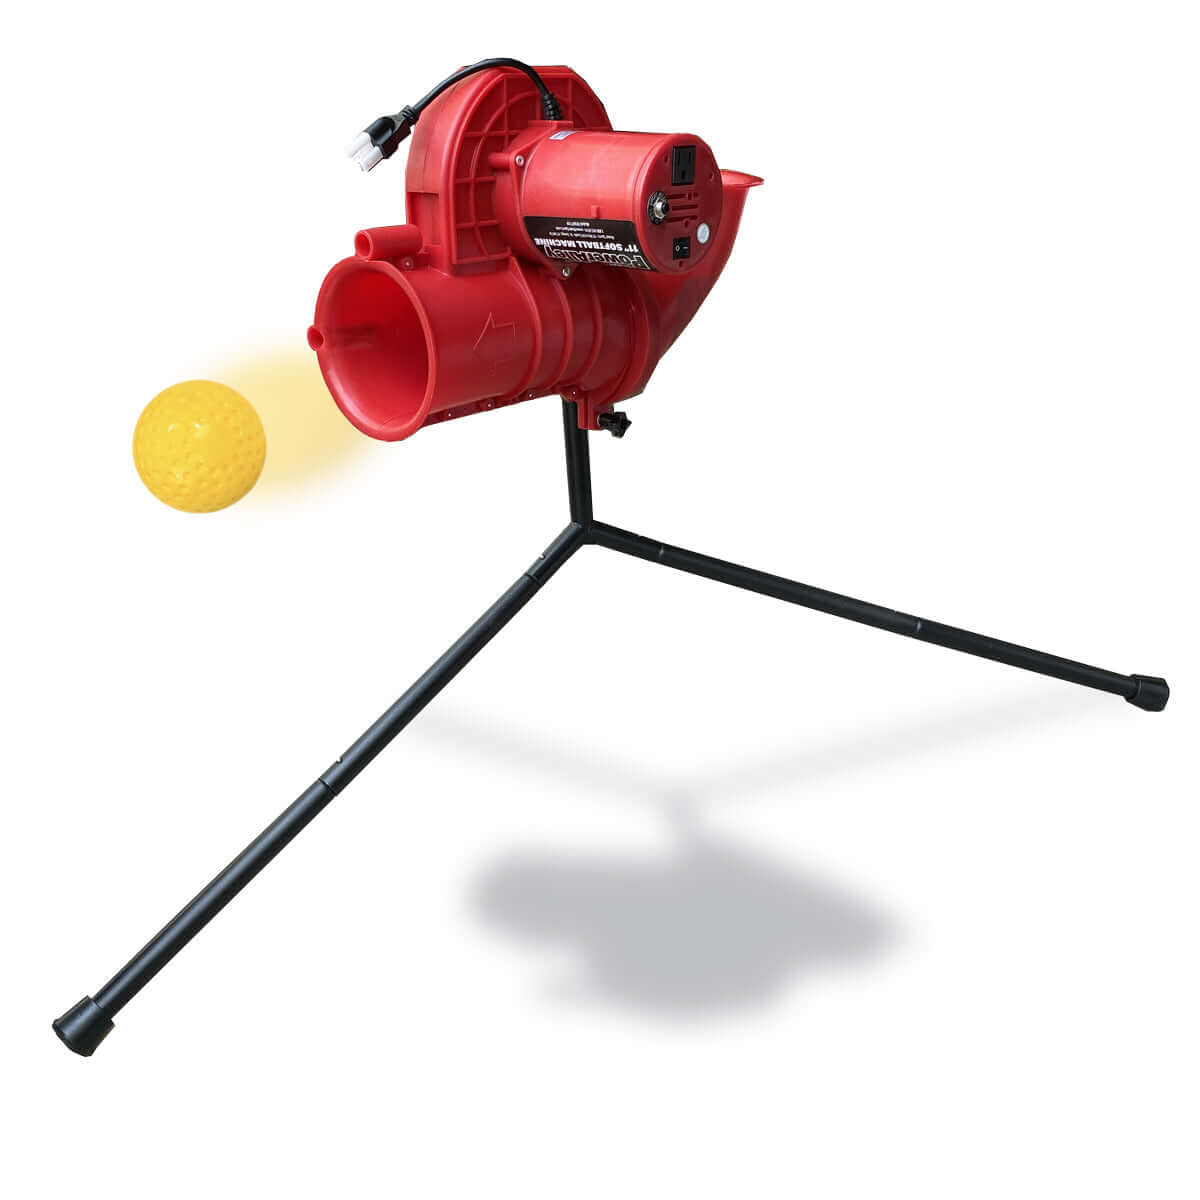 12" Lite Softball Pitching Machine - Variable Speed - Heater Sports - Pitches Up To 50 MPH - Fast Pitch & Slow Pitch - Pitch Machine Pros